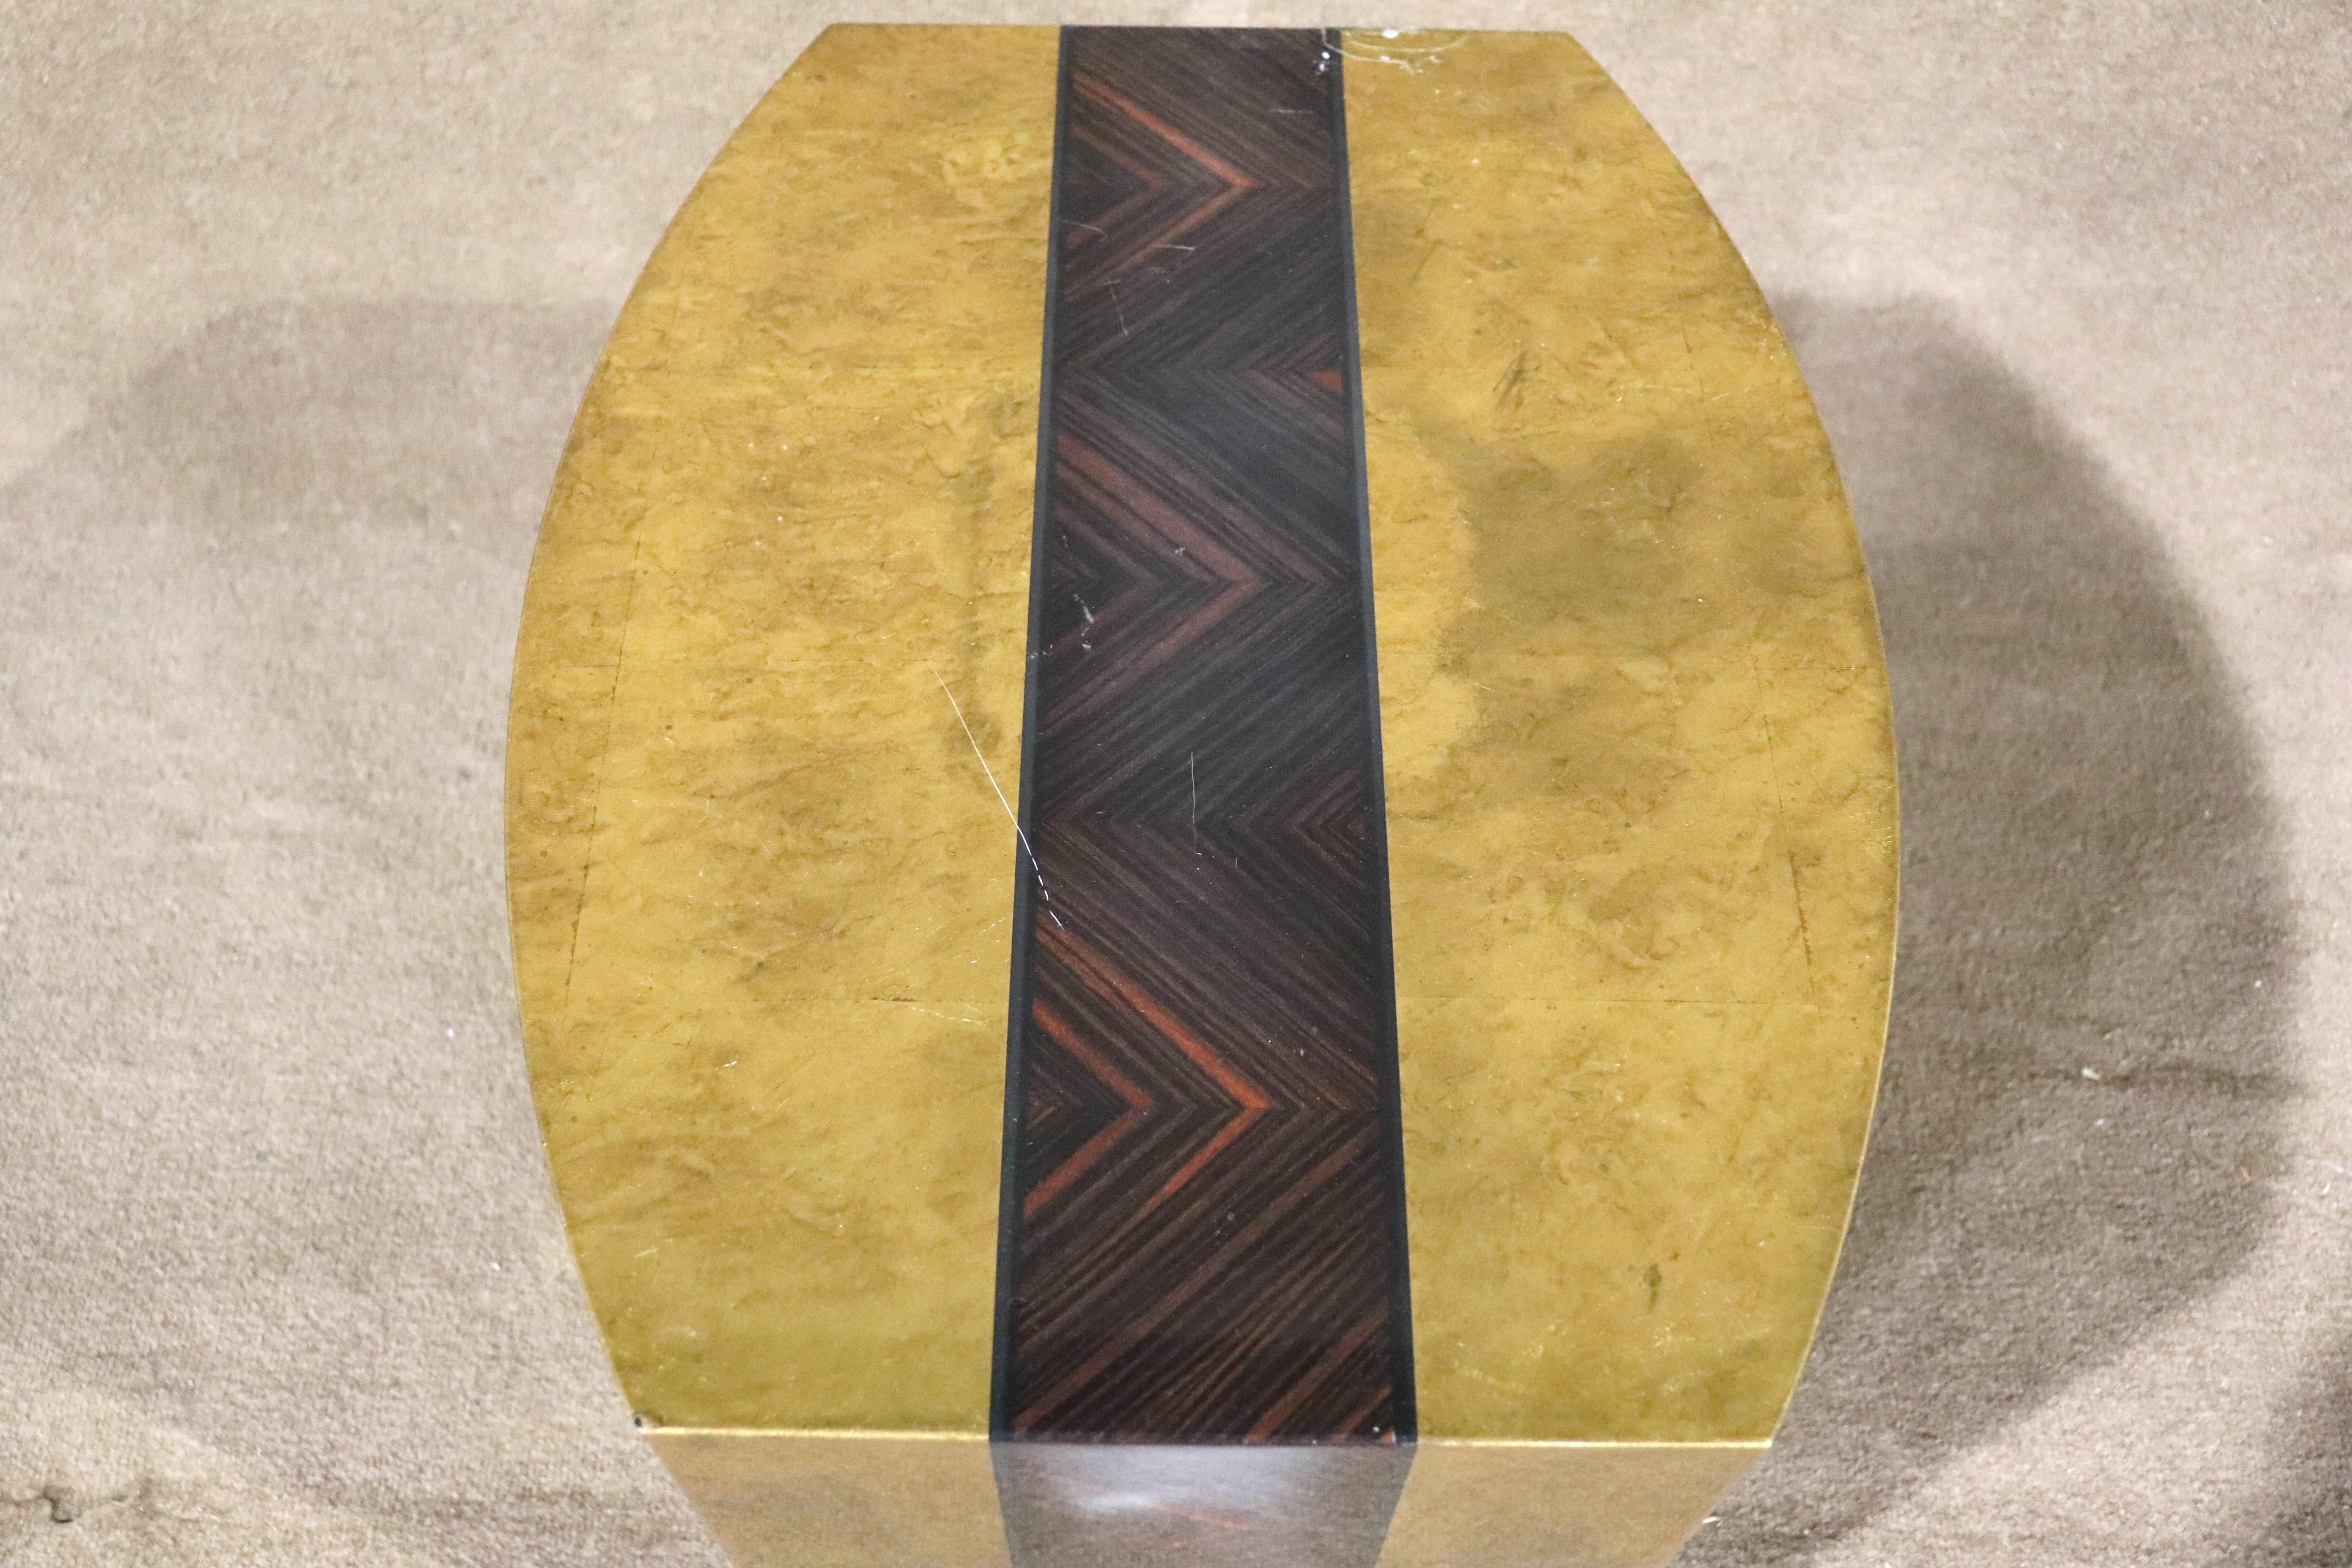 Small semi-oval table with patina brass colored lacquer and a stripe of rosewood grain. Great pop of color for your living room.
Please confirm location NY or NJ